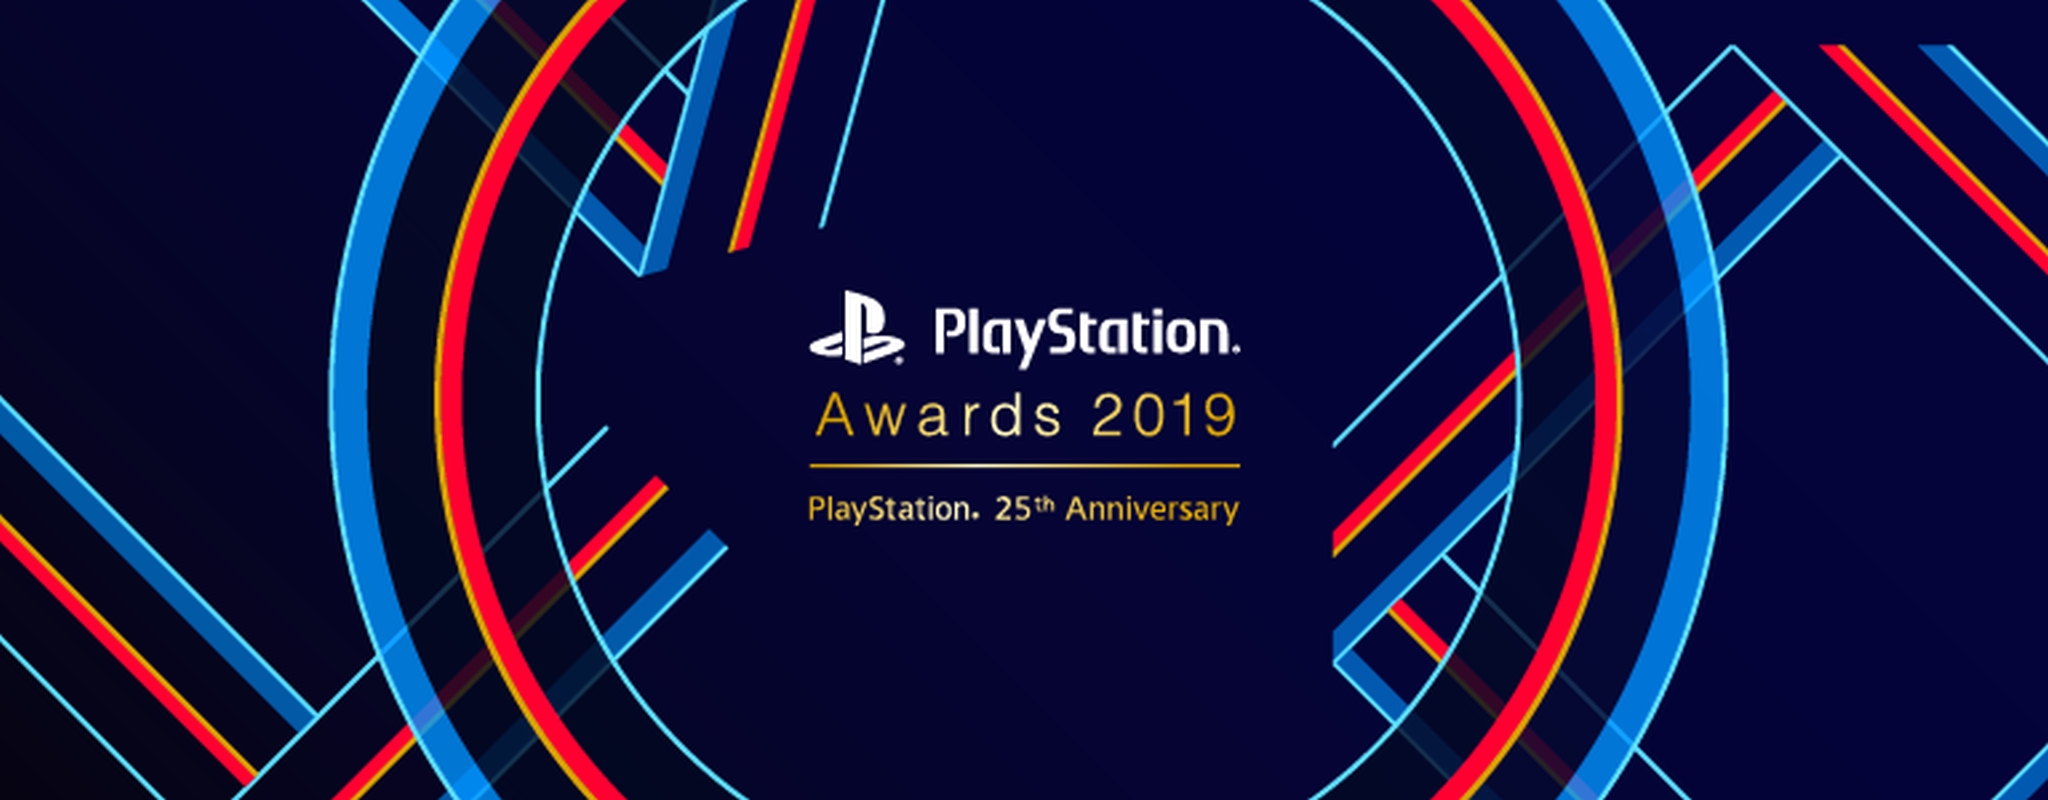 Sony PlayStation 25th Awards 2019 Winners Announced